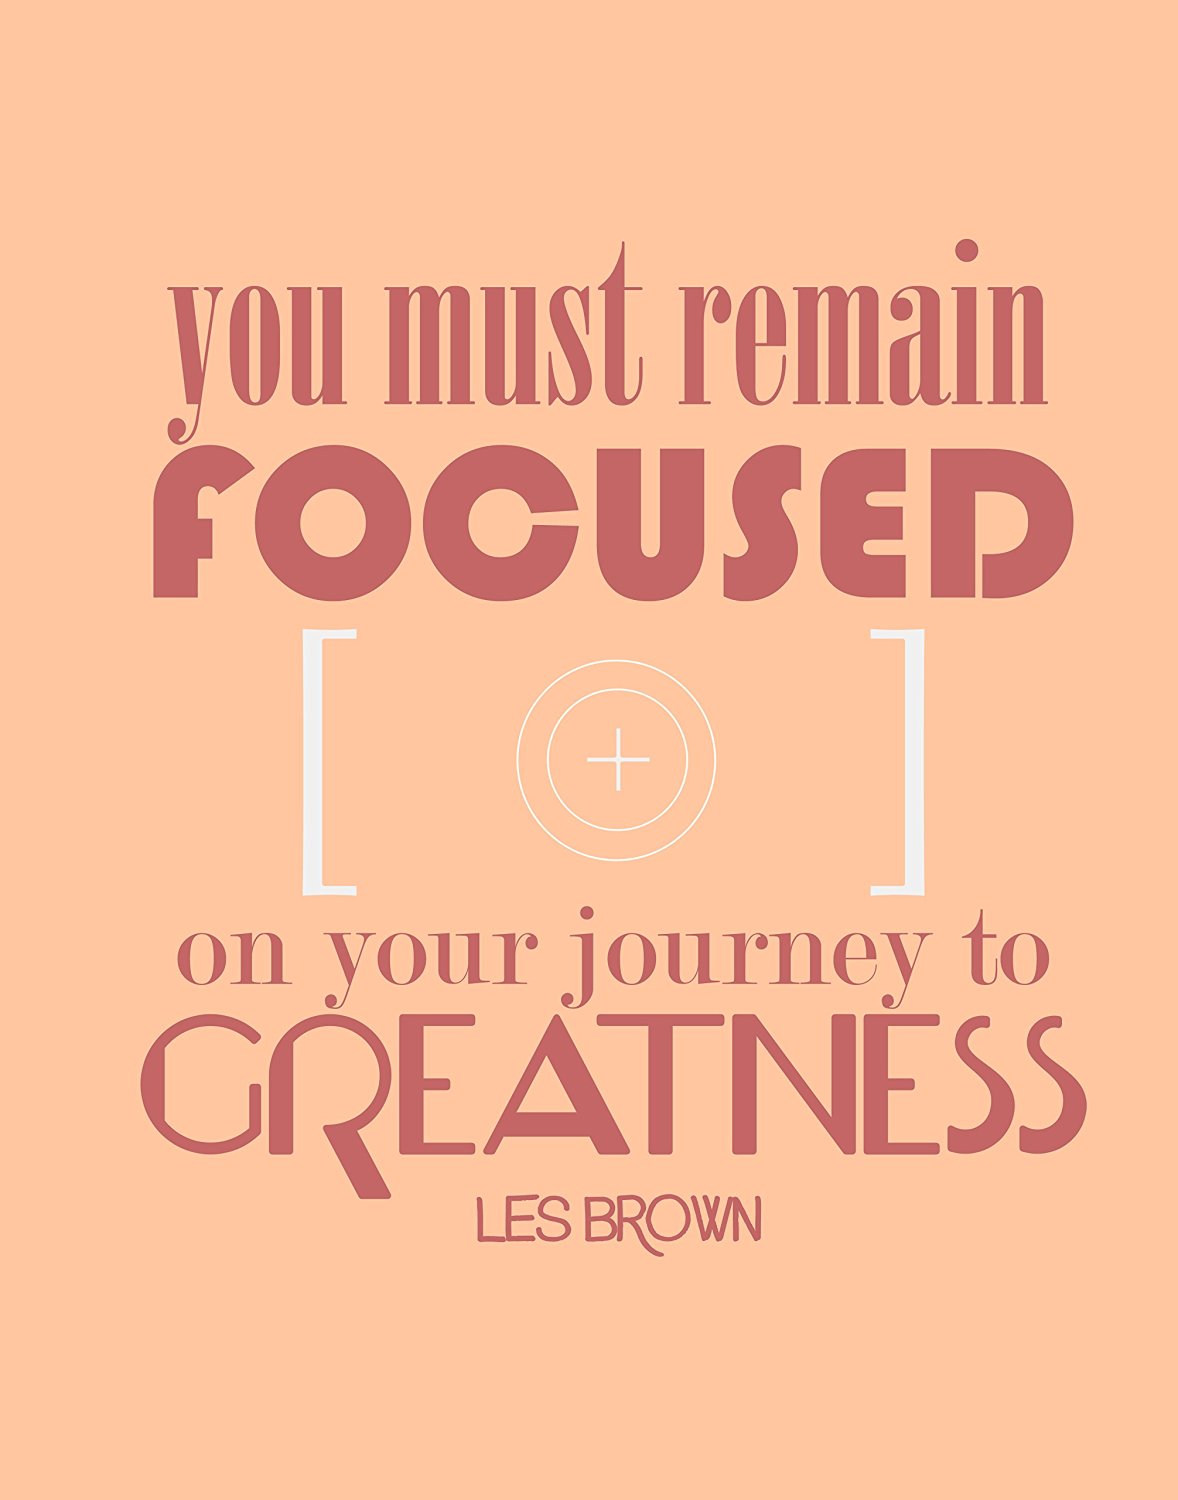 Remain Focused Les Brown Daily Quotes Sayings Pictures